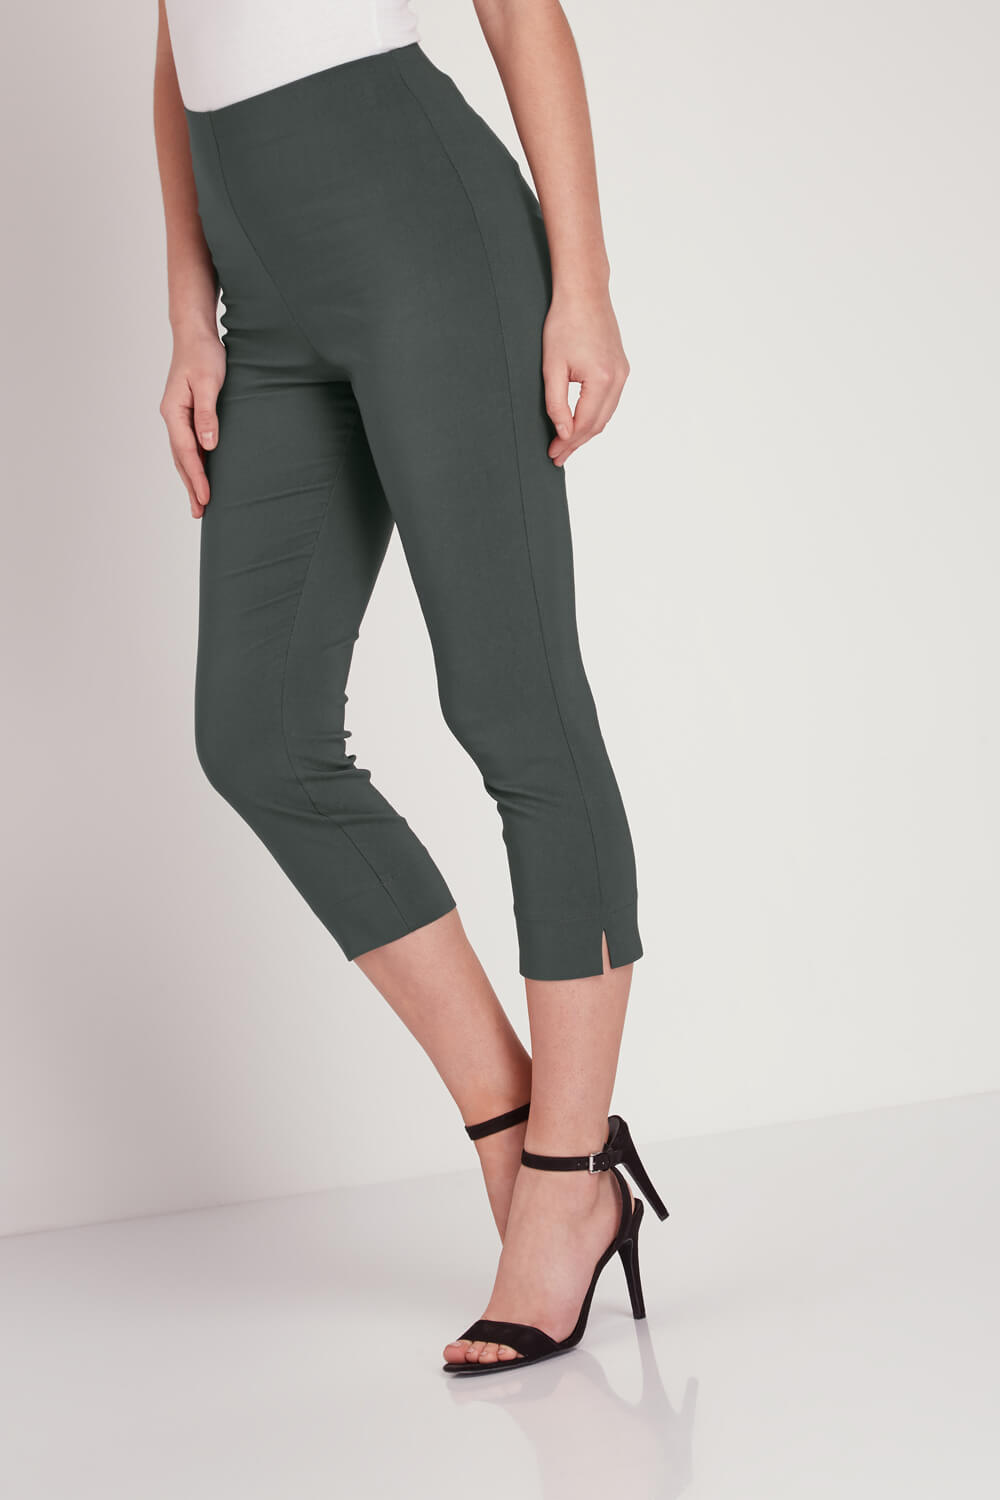 Bottle Green Cropped Stretch Trouser, Image 2 of 5